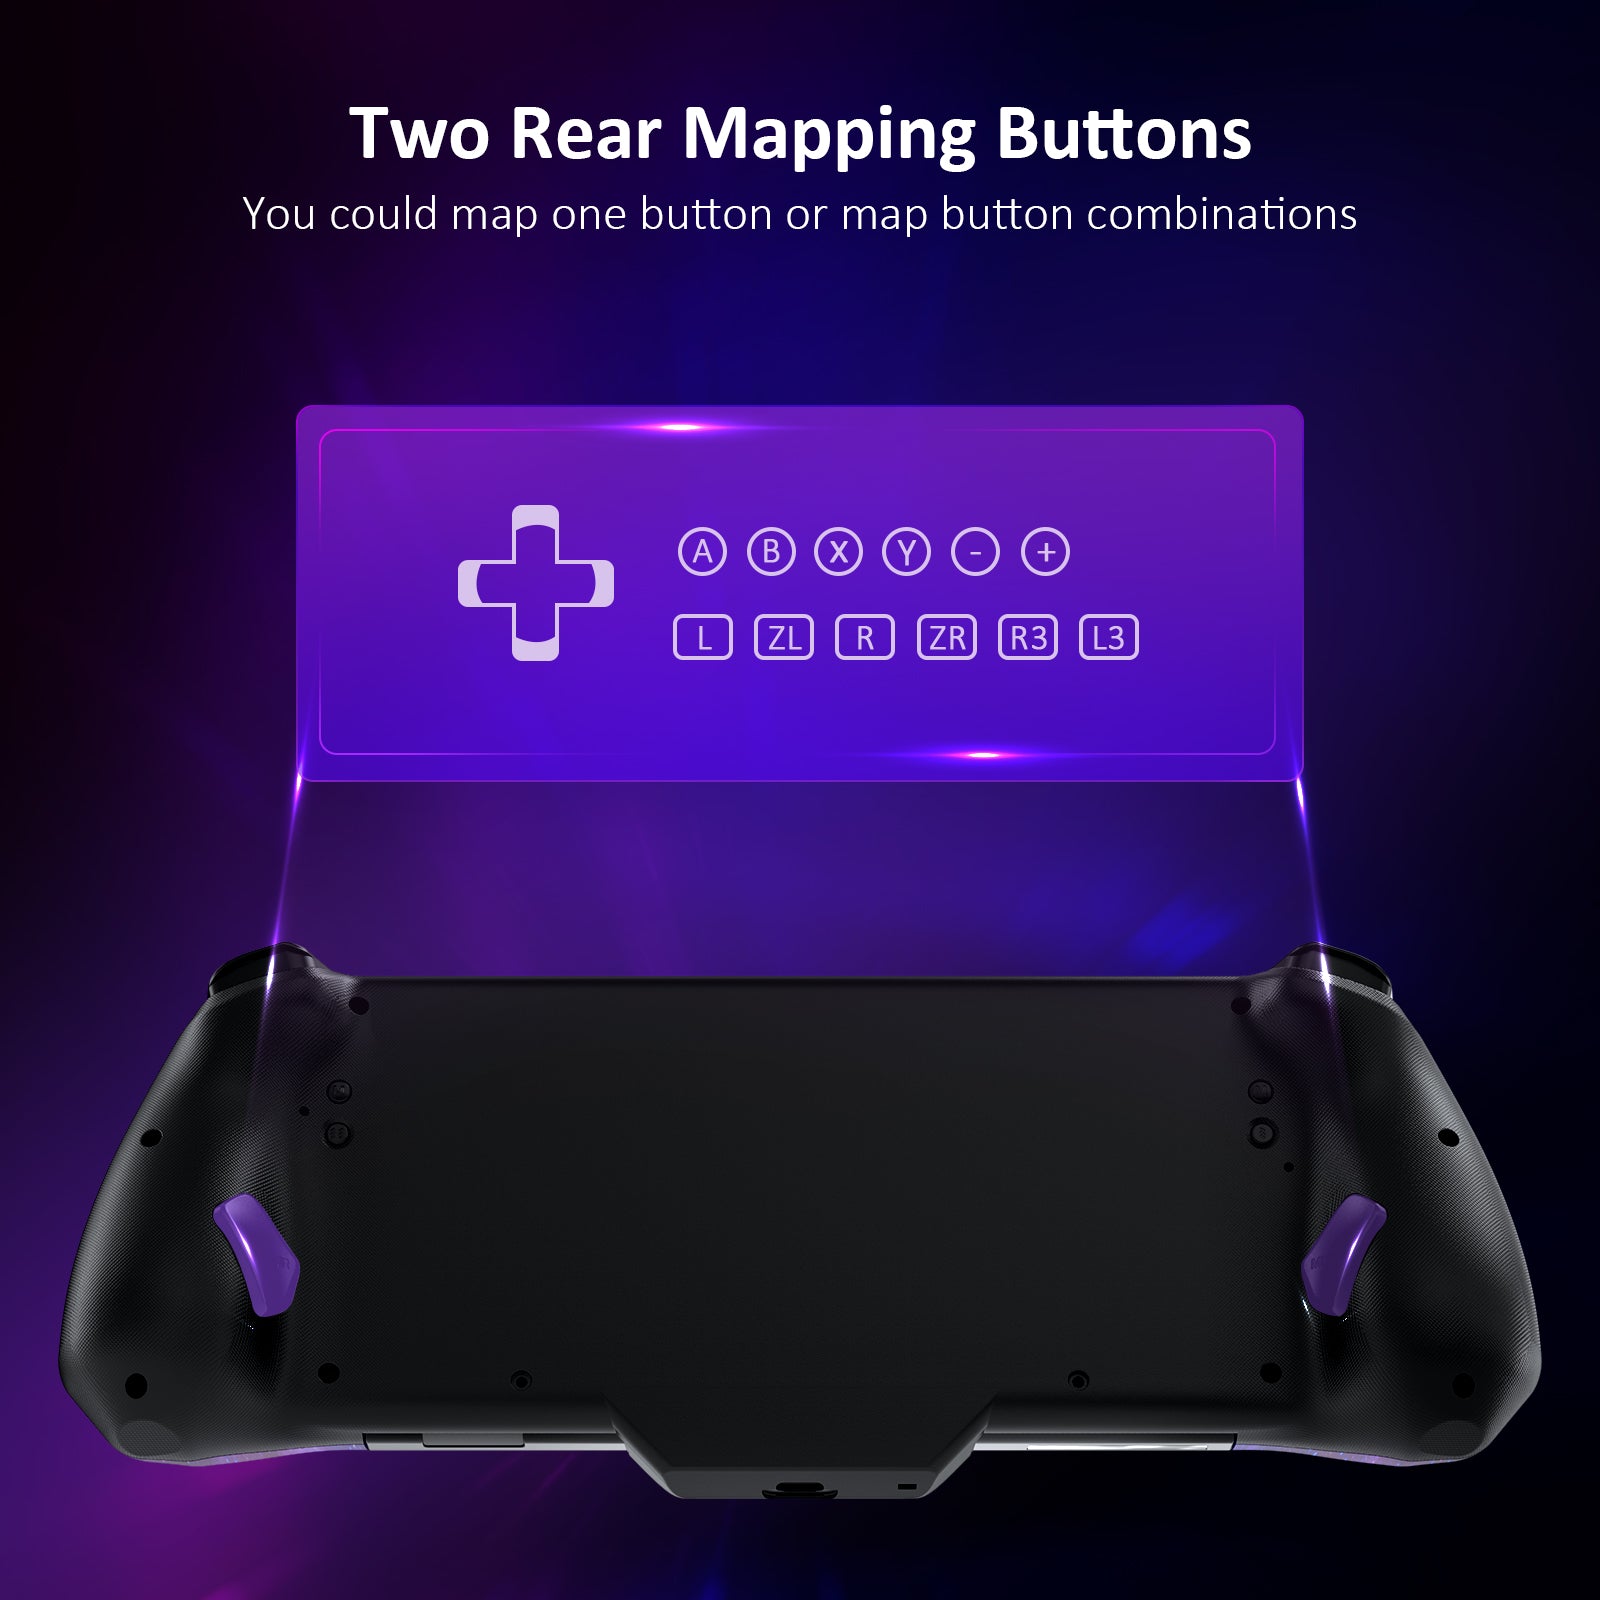 Gripcon controller features 2 Rear Mapping Buttons for customizable settings.